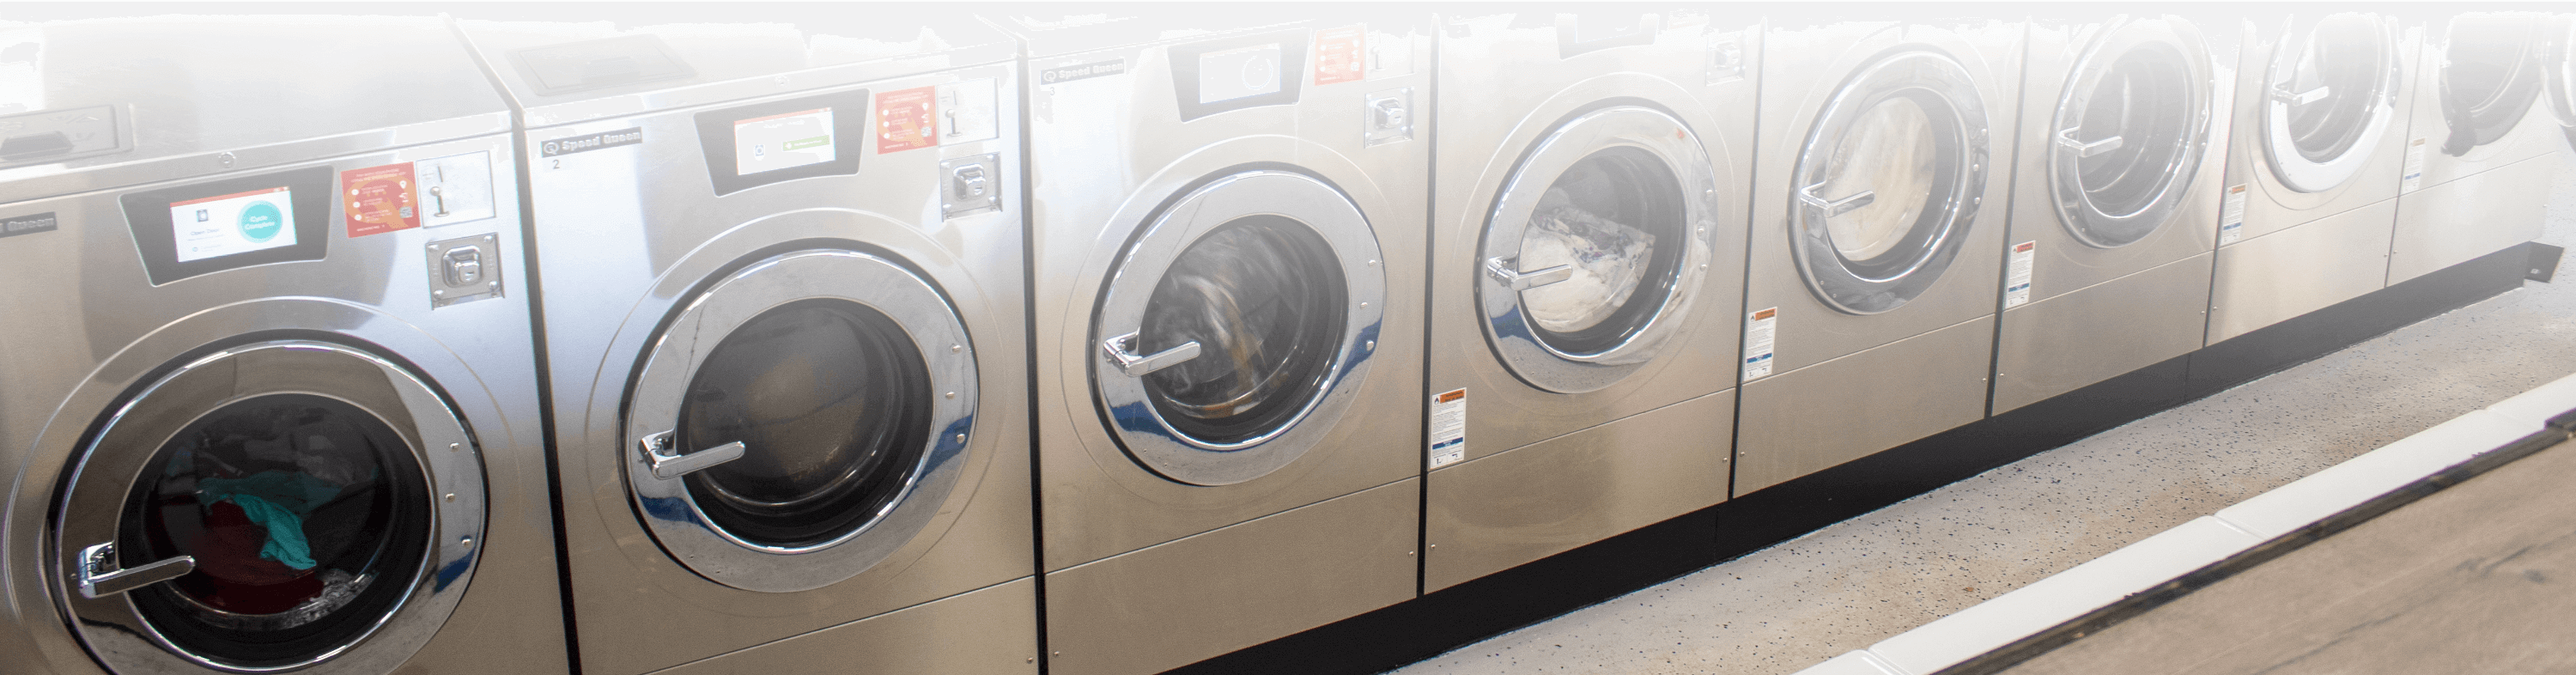 row of Speed Queen washing machines in laundromat